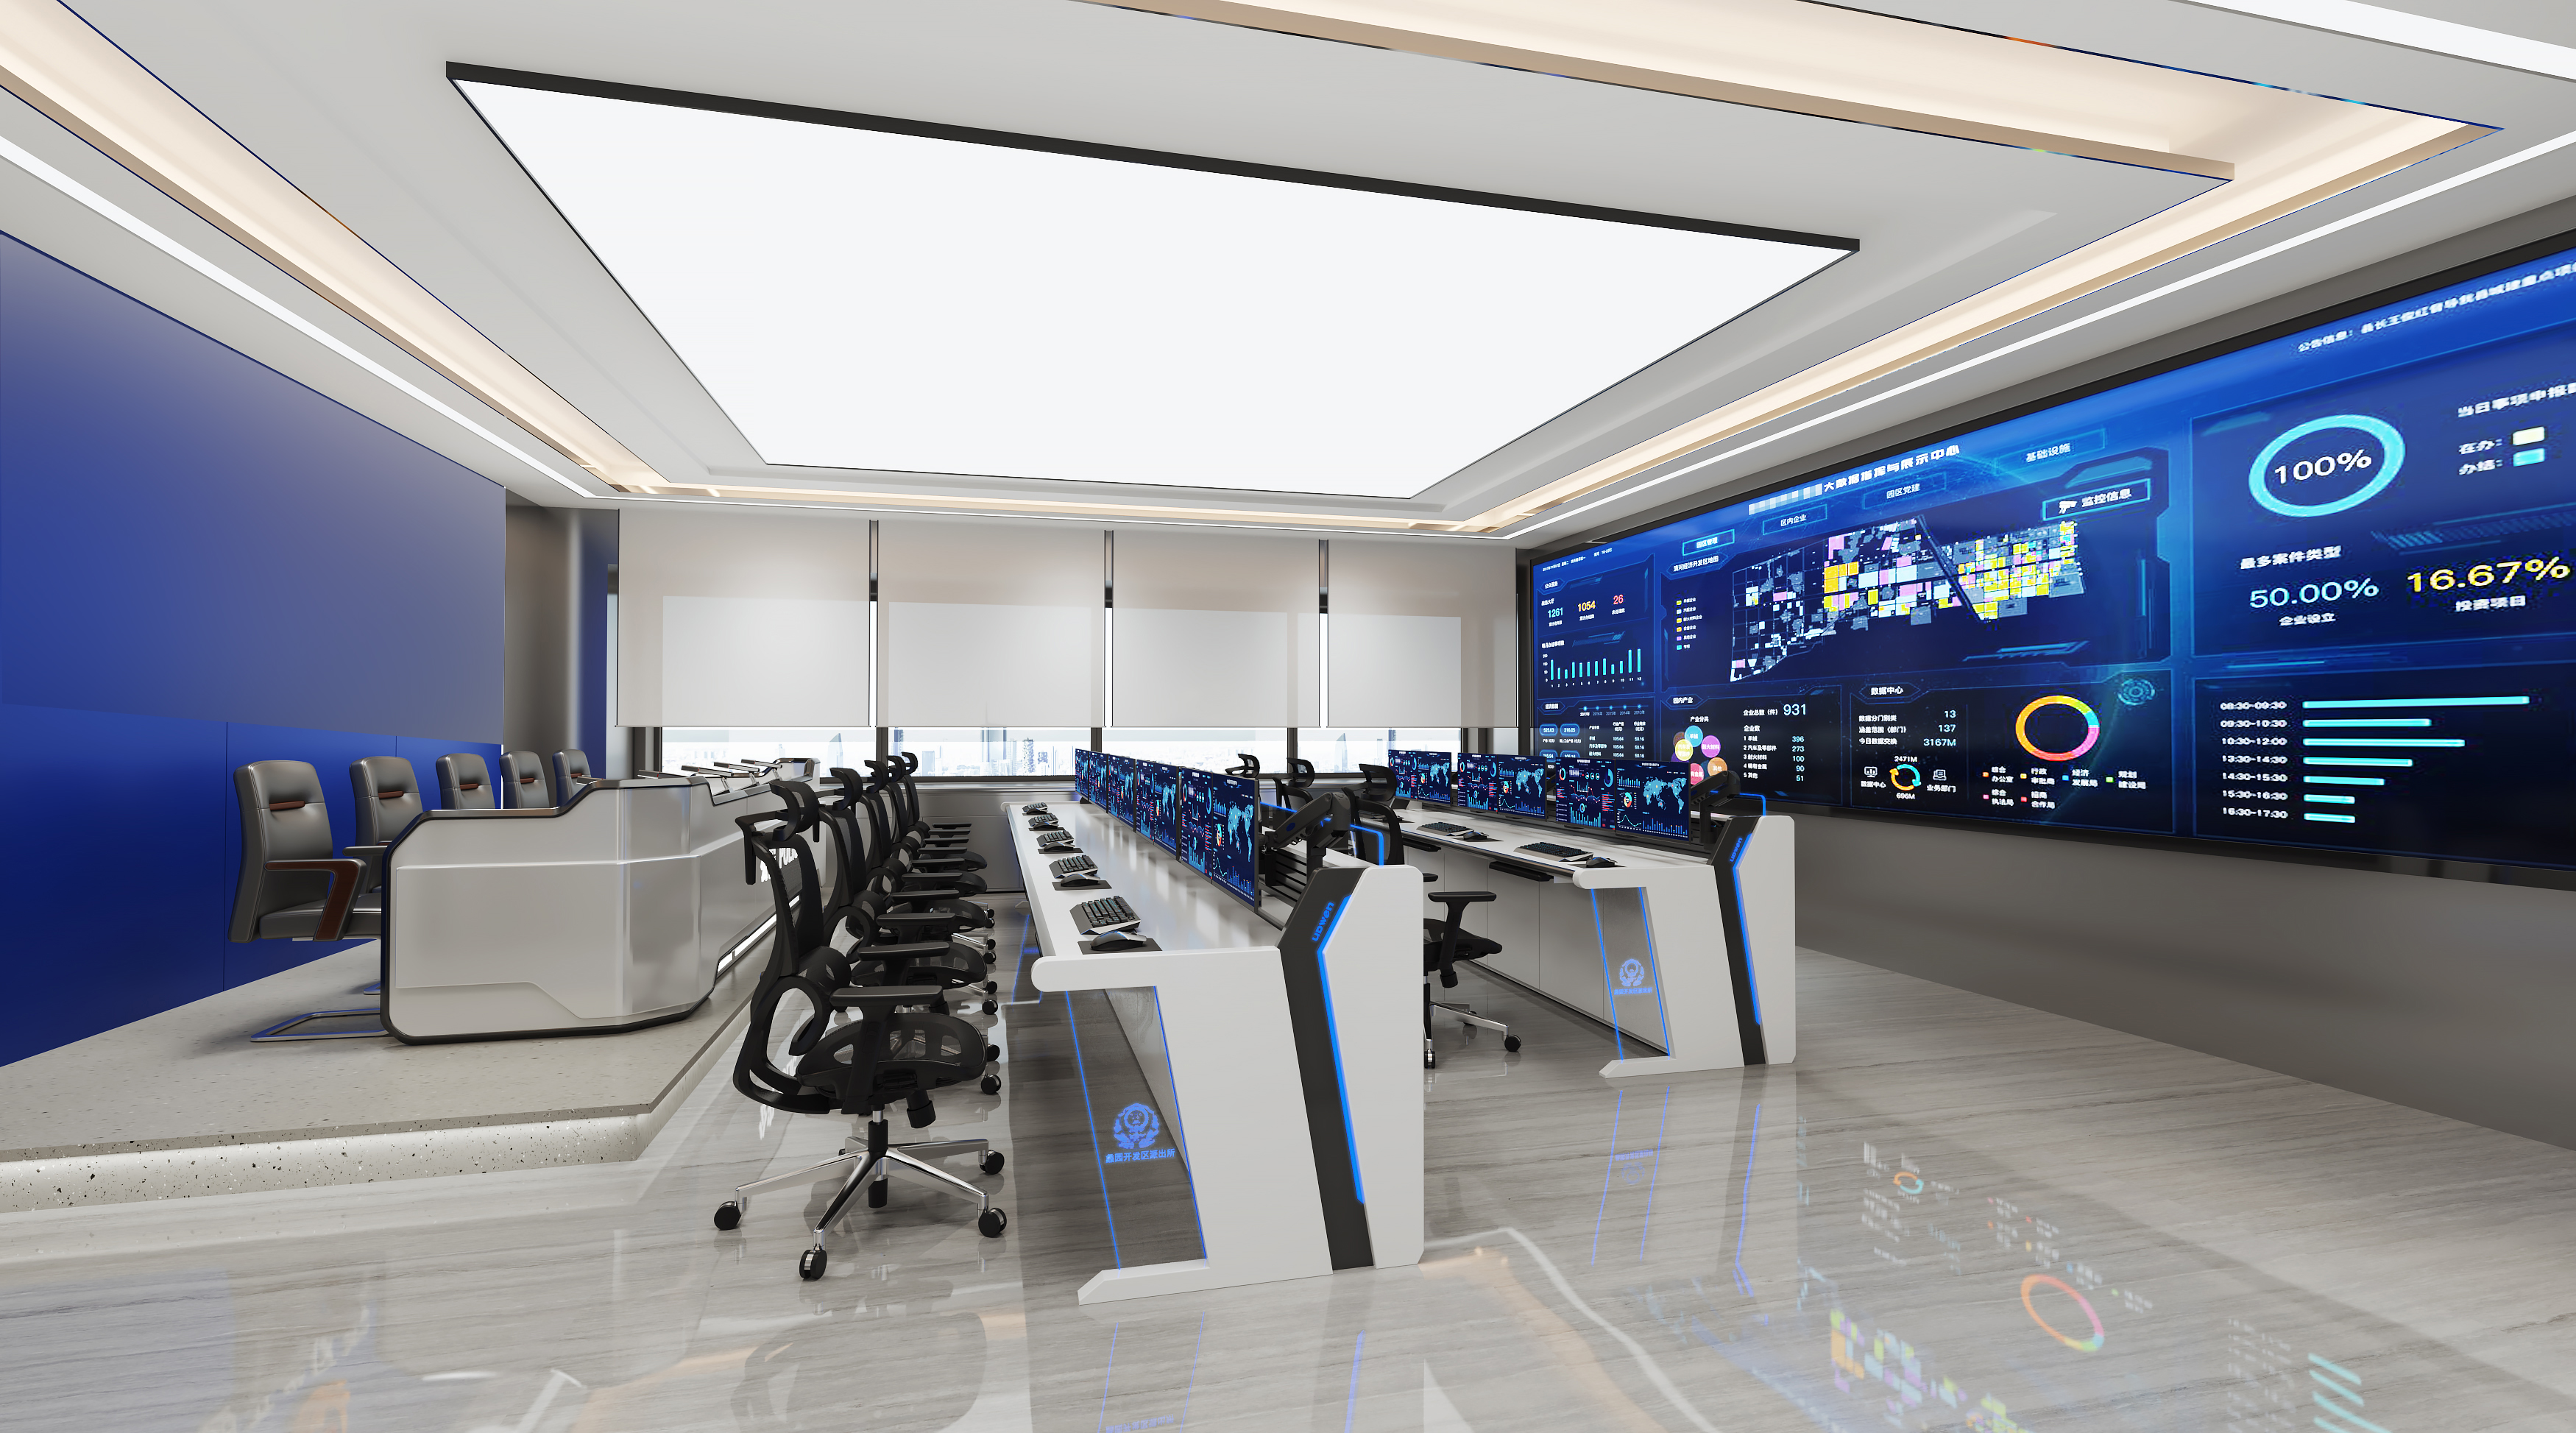 Control room console application in railway stations